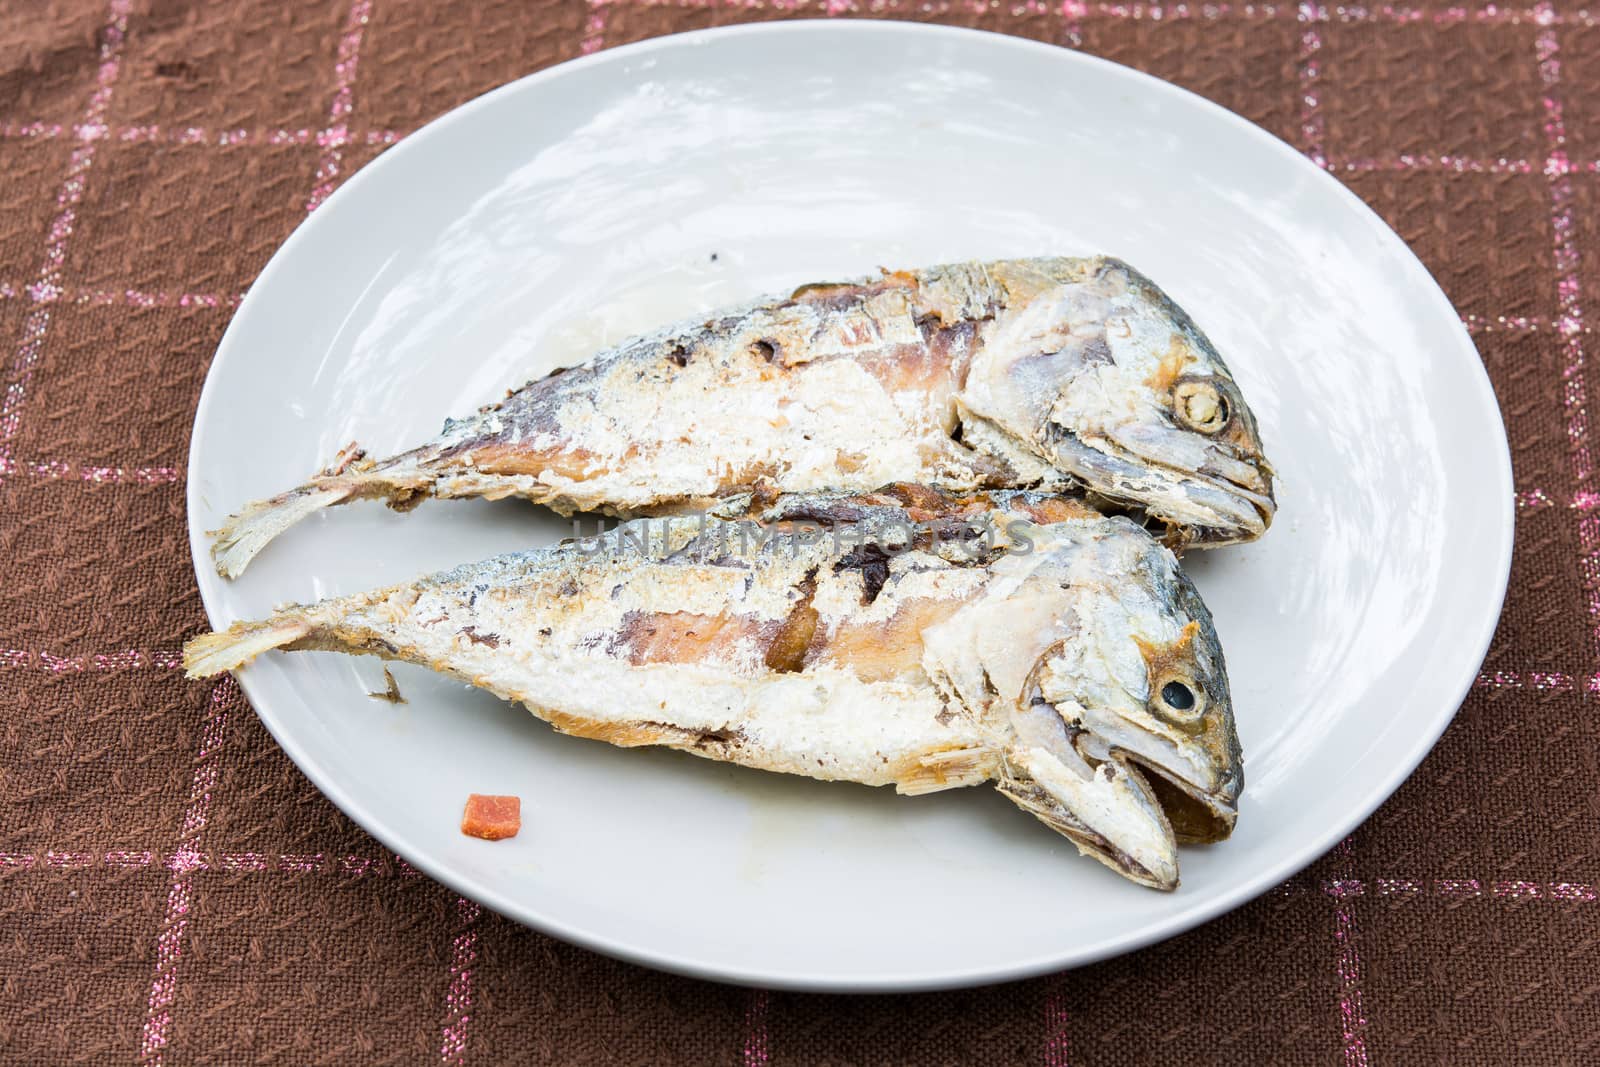 Two Fried Mackerel in plate on table